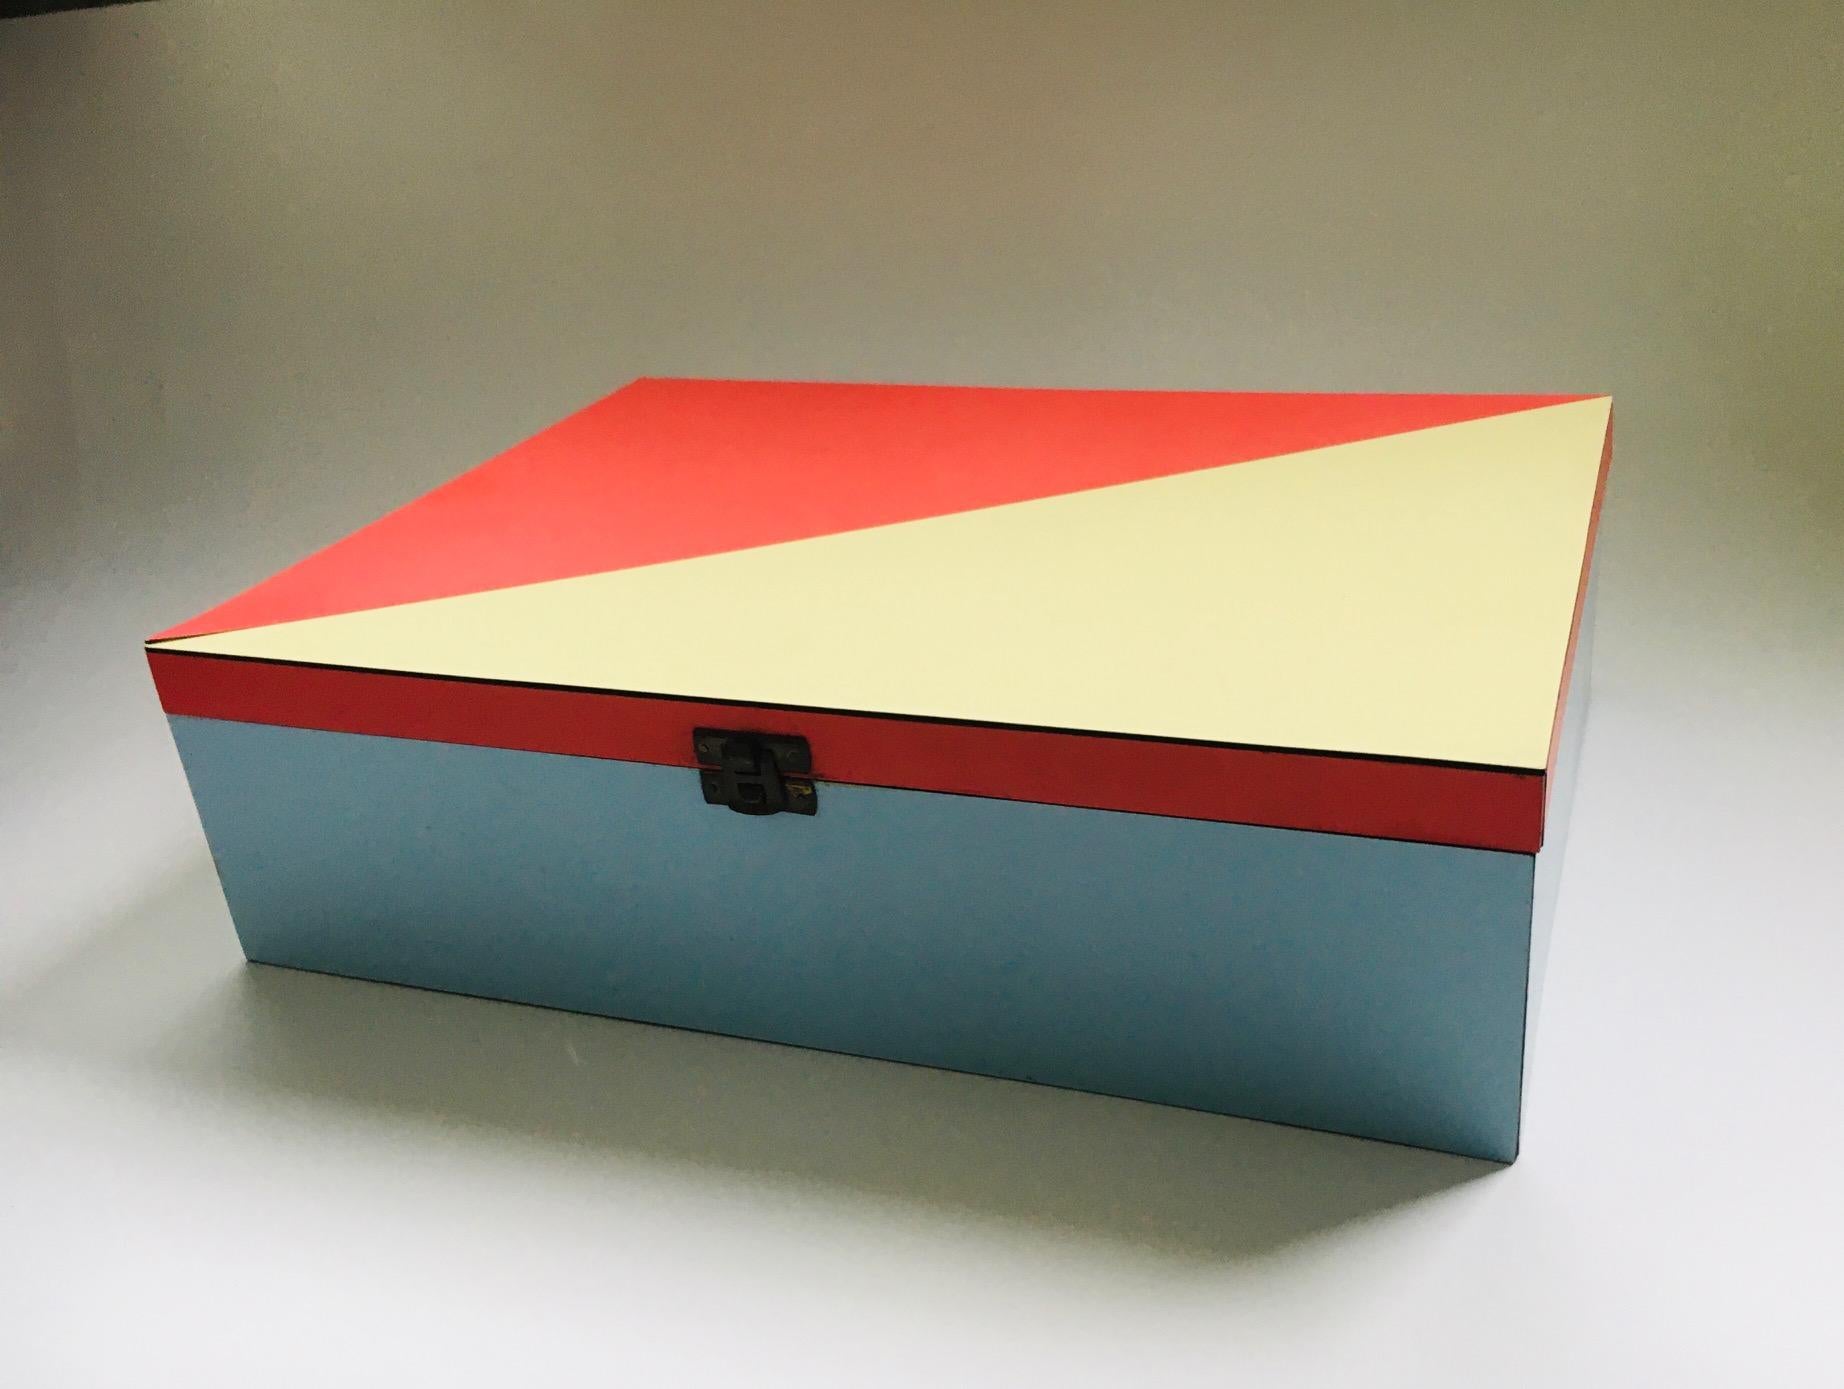 Midcentury Modern Dutch Design STIJL Modernism Letter Box, 1950's Holland In Good Condition For Sale In Oud-Turnhout, VAN